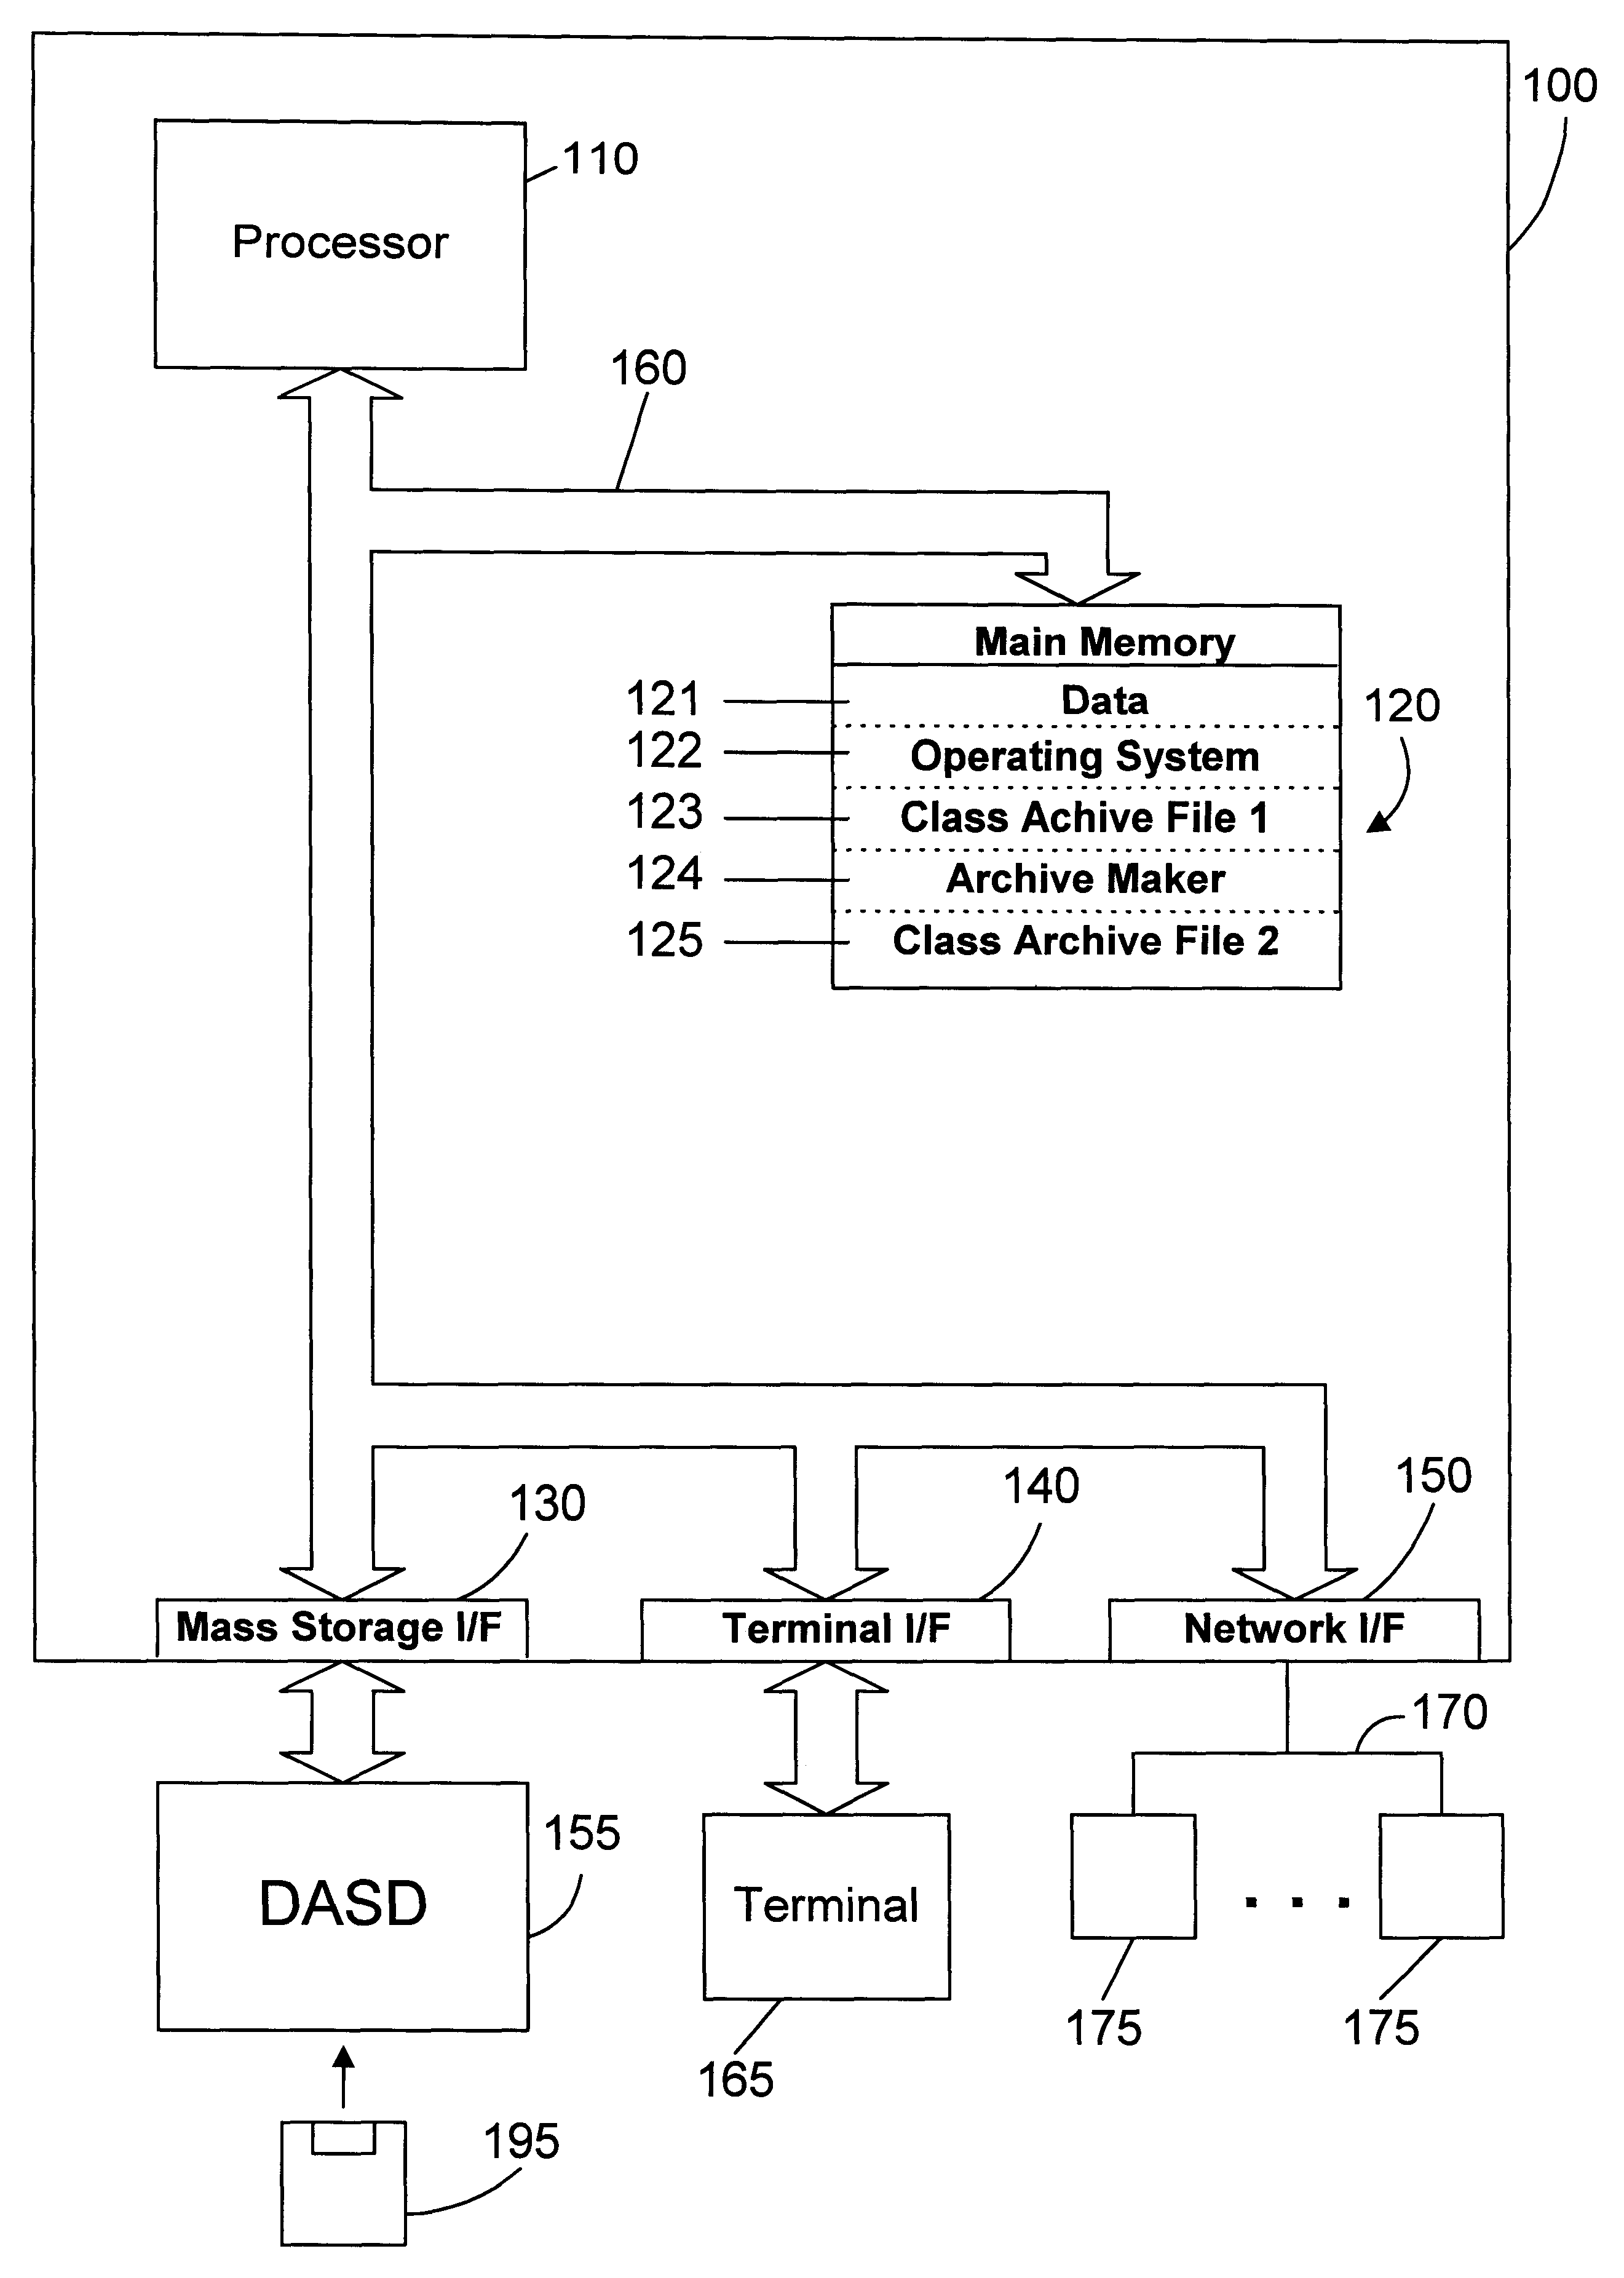 Object oriented class archive file maker and method